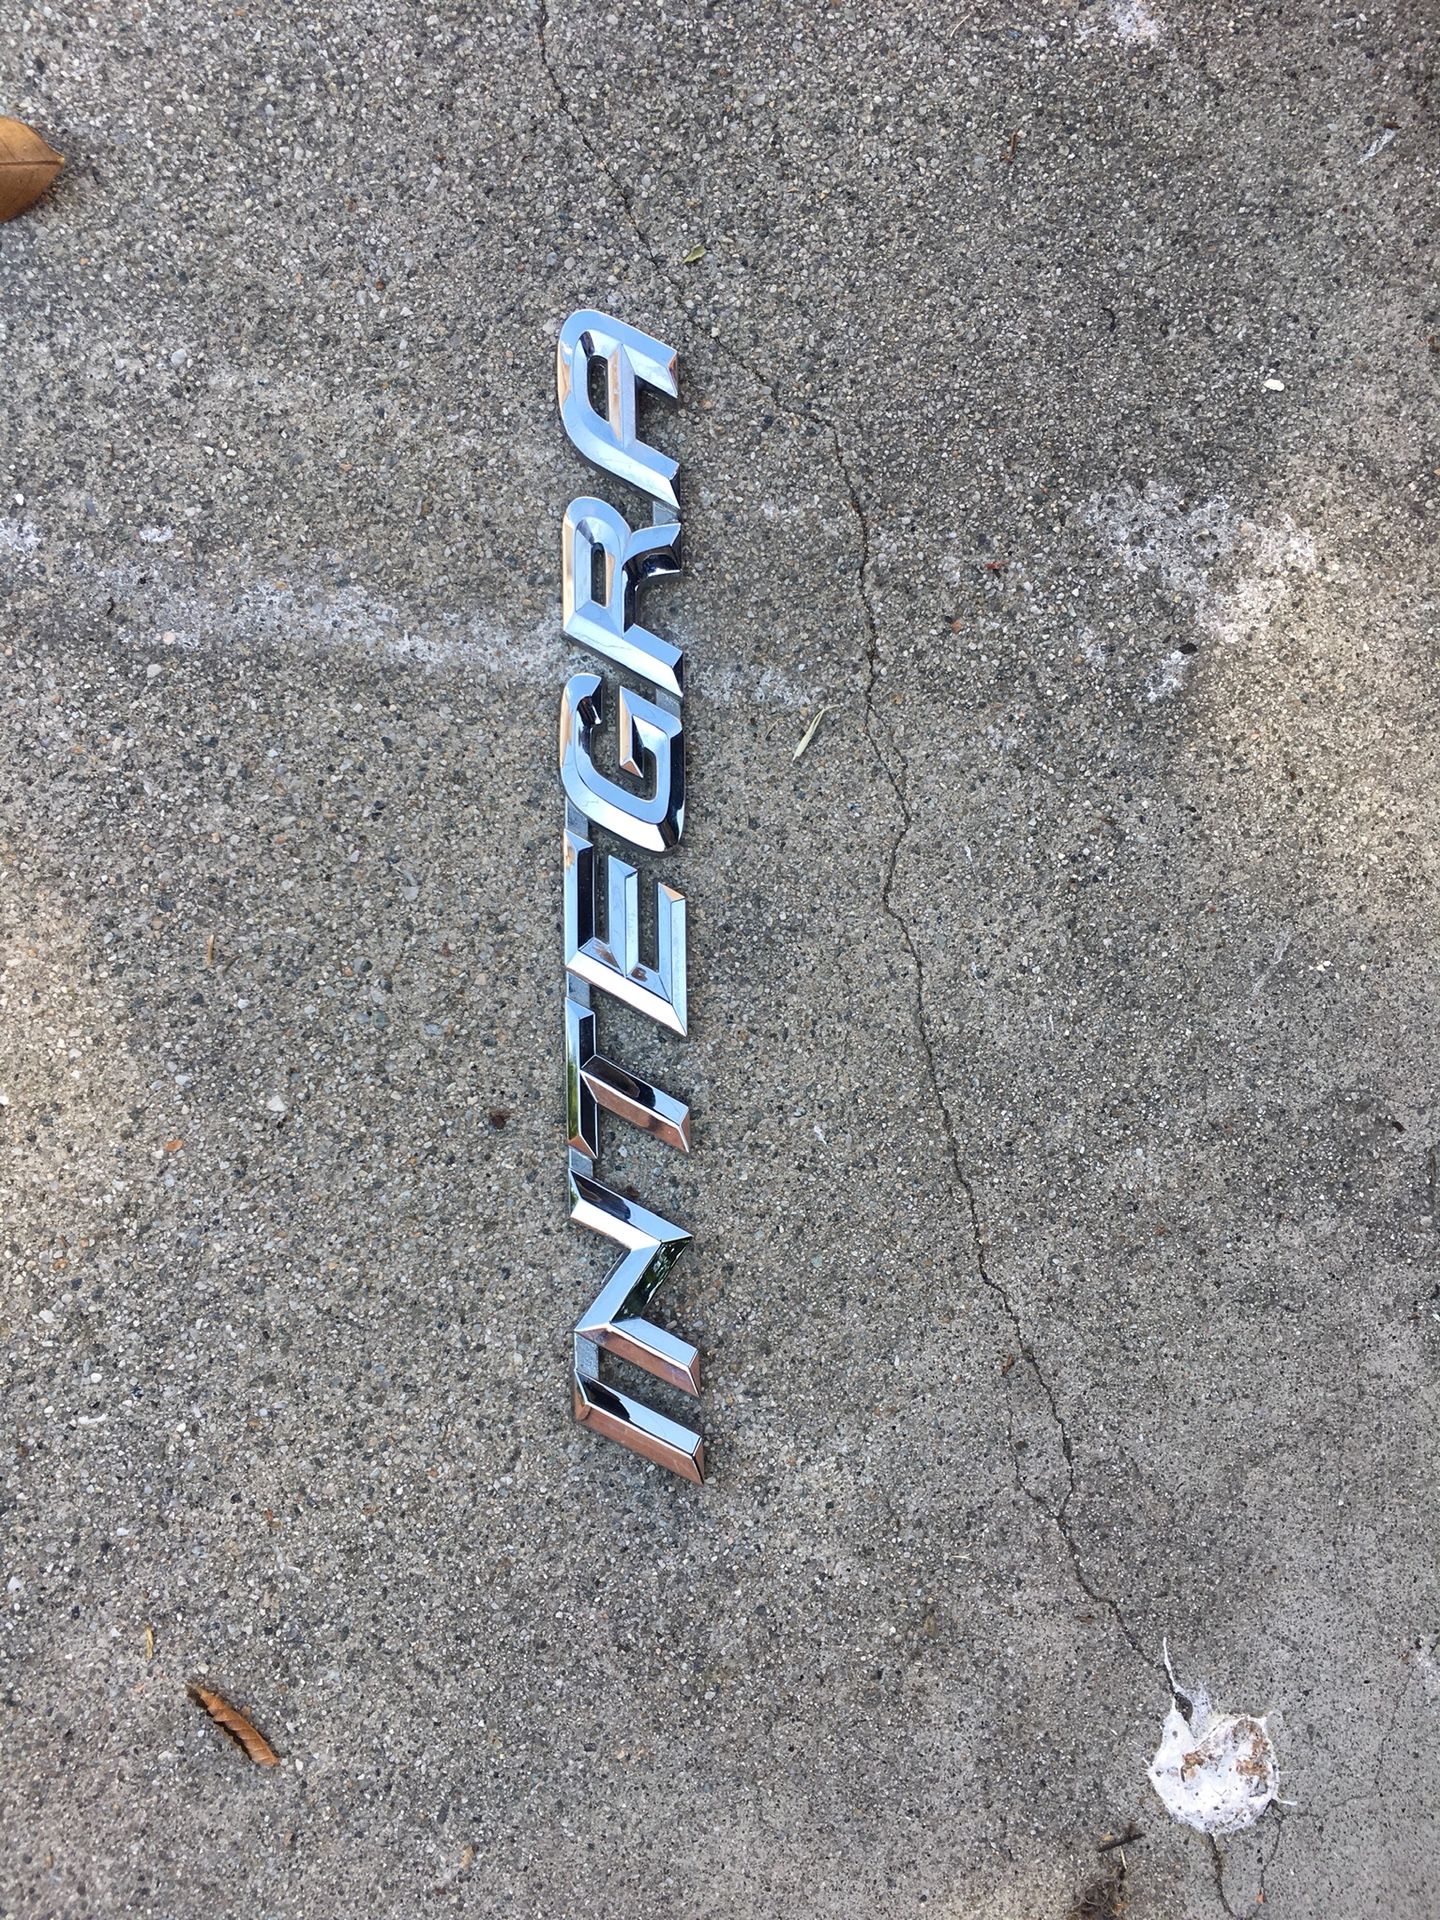 2002-2006 Acura Integra Dc5 Badge - Oem Honda Part- Asking $40.00 Firm ready with 3m tape